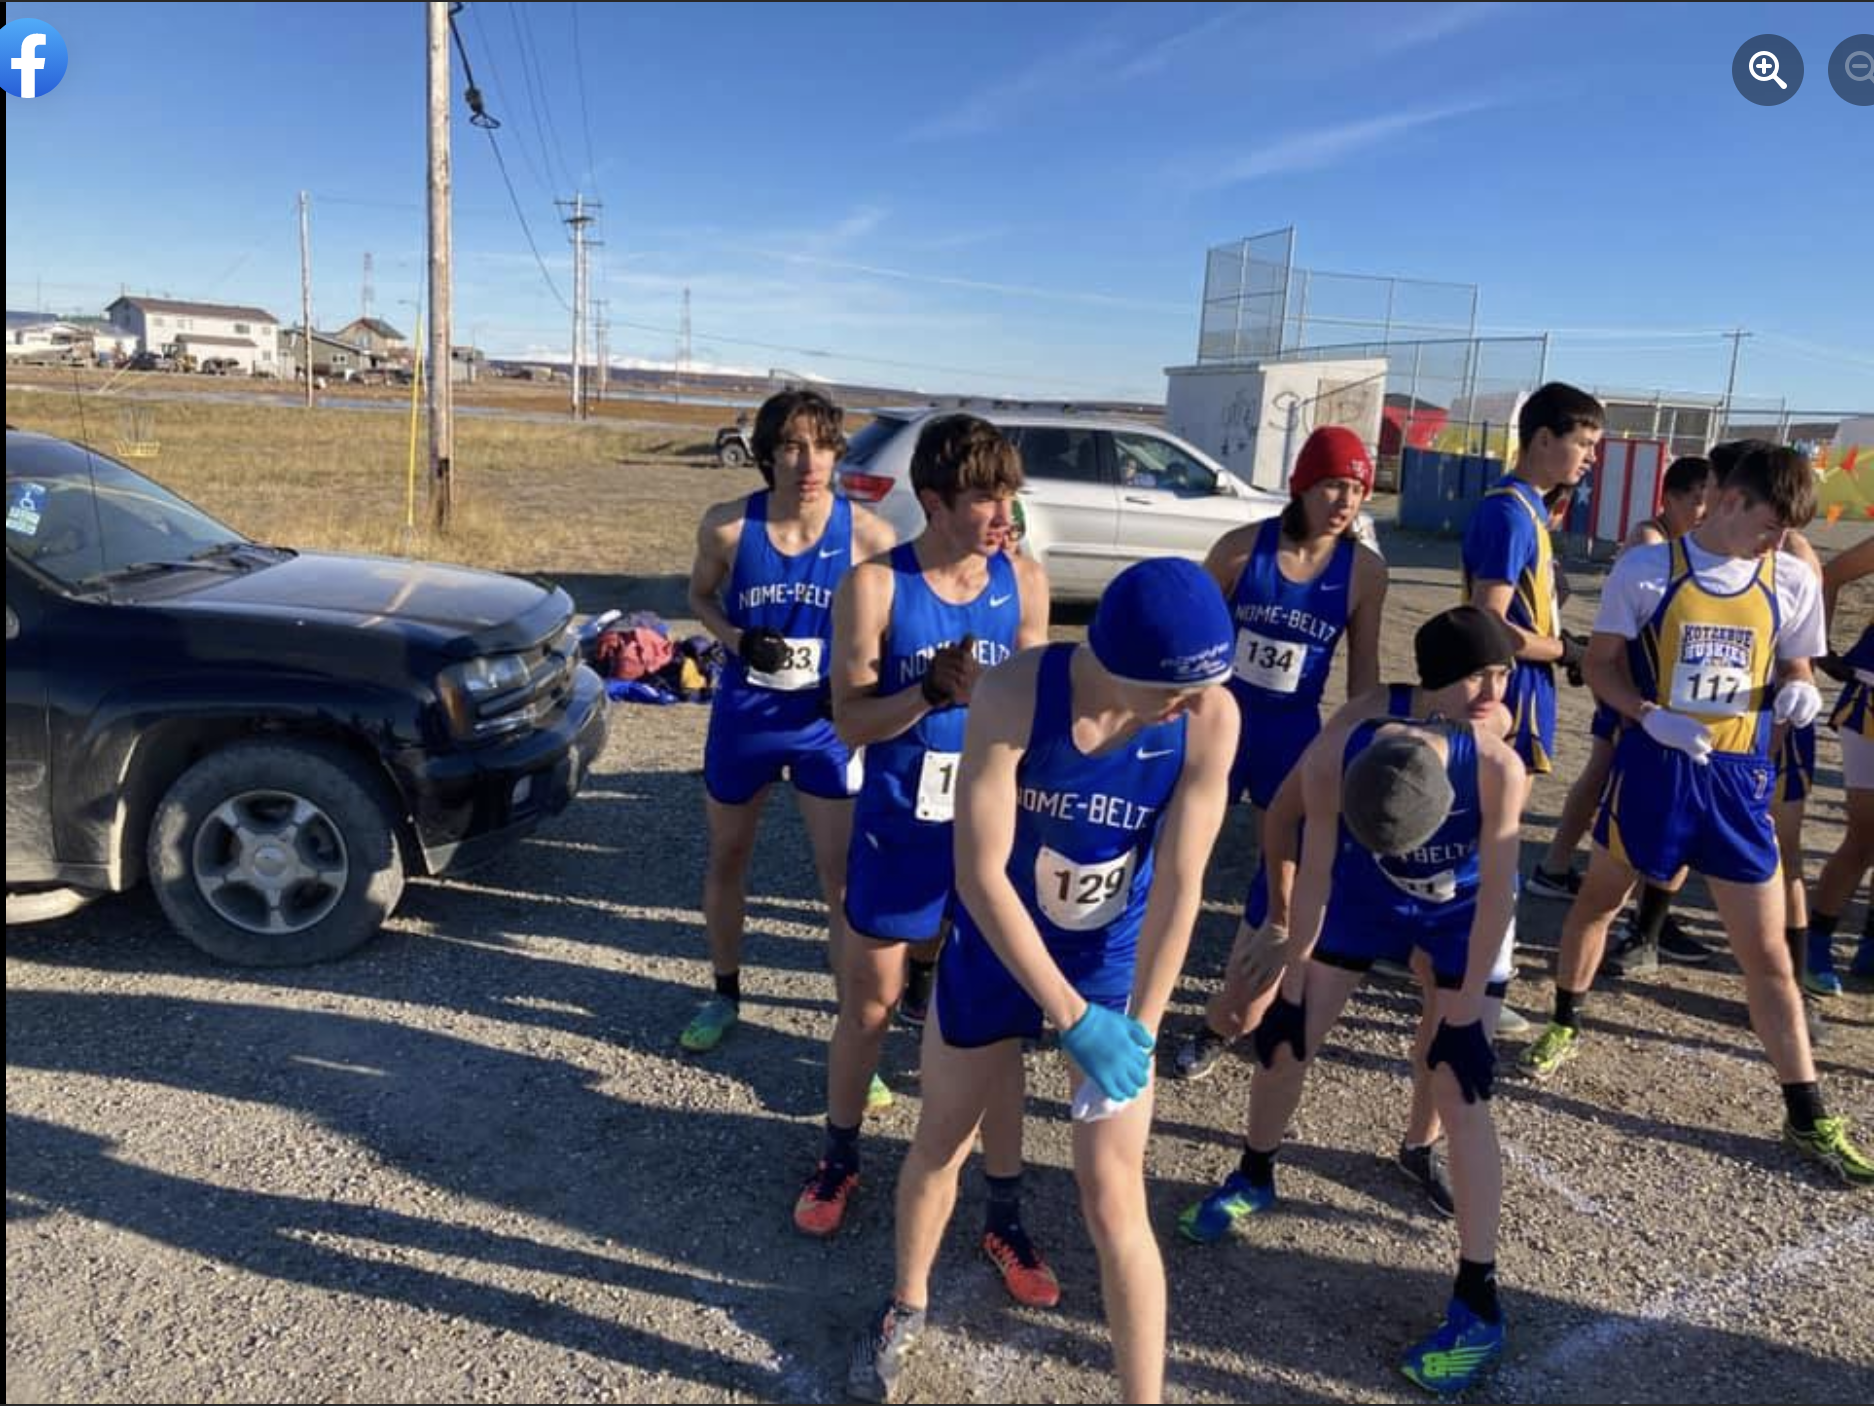 A group of cross country boys waiting to start race outside.